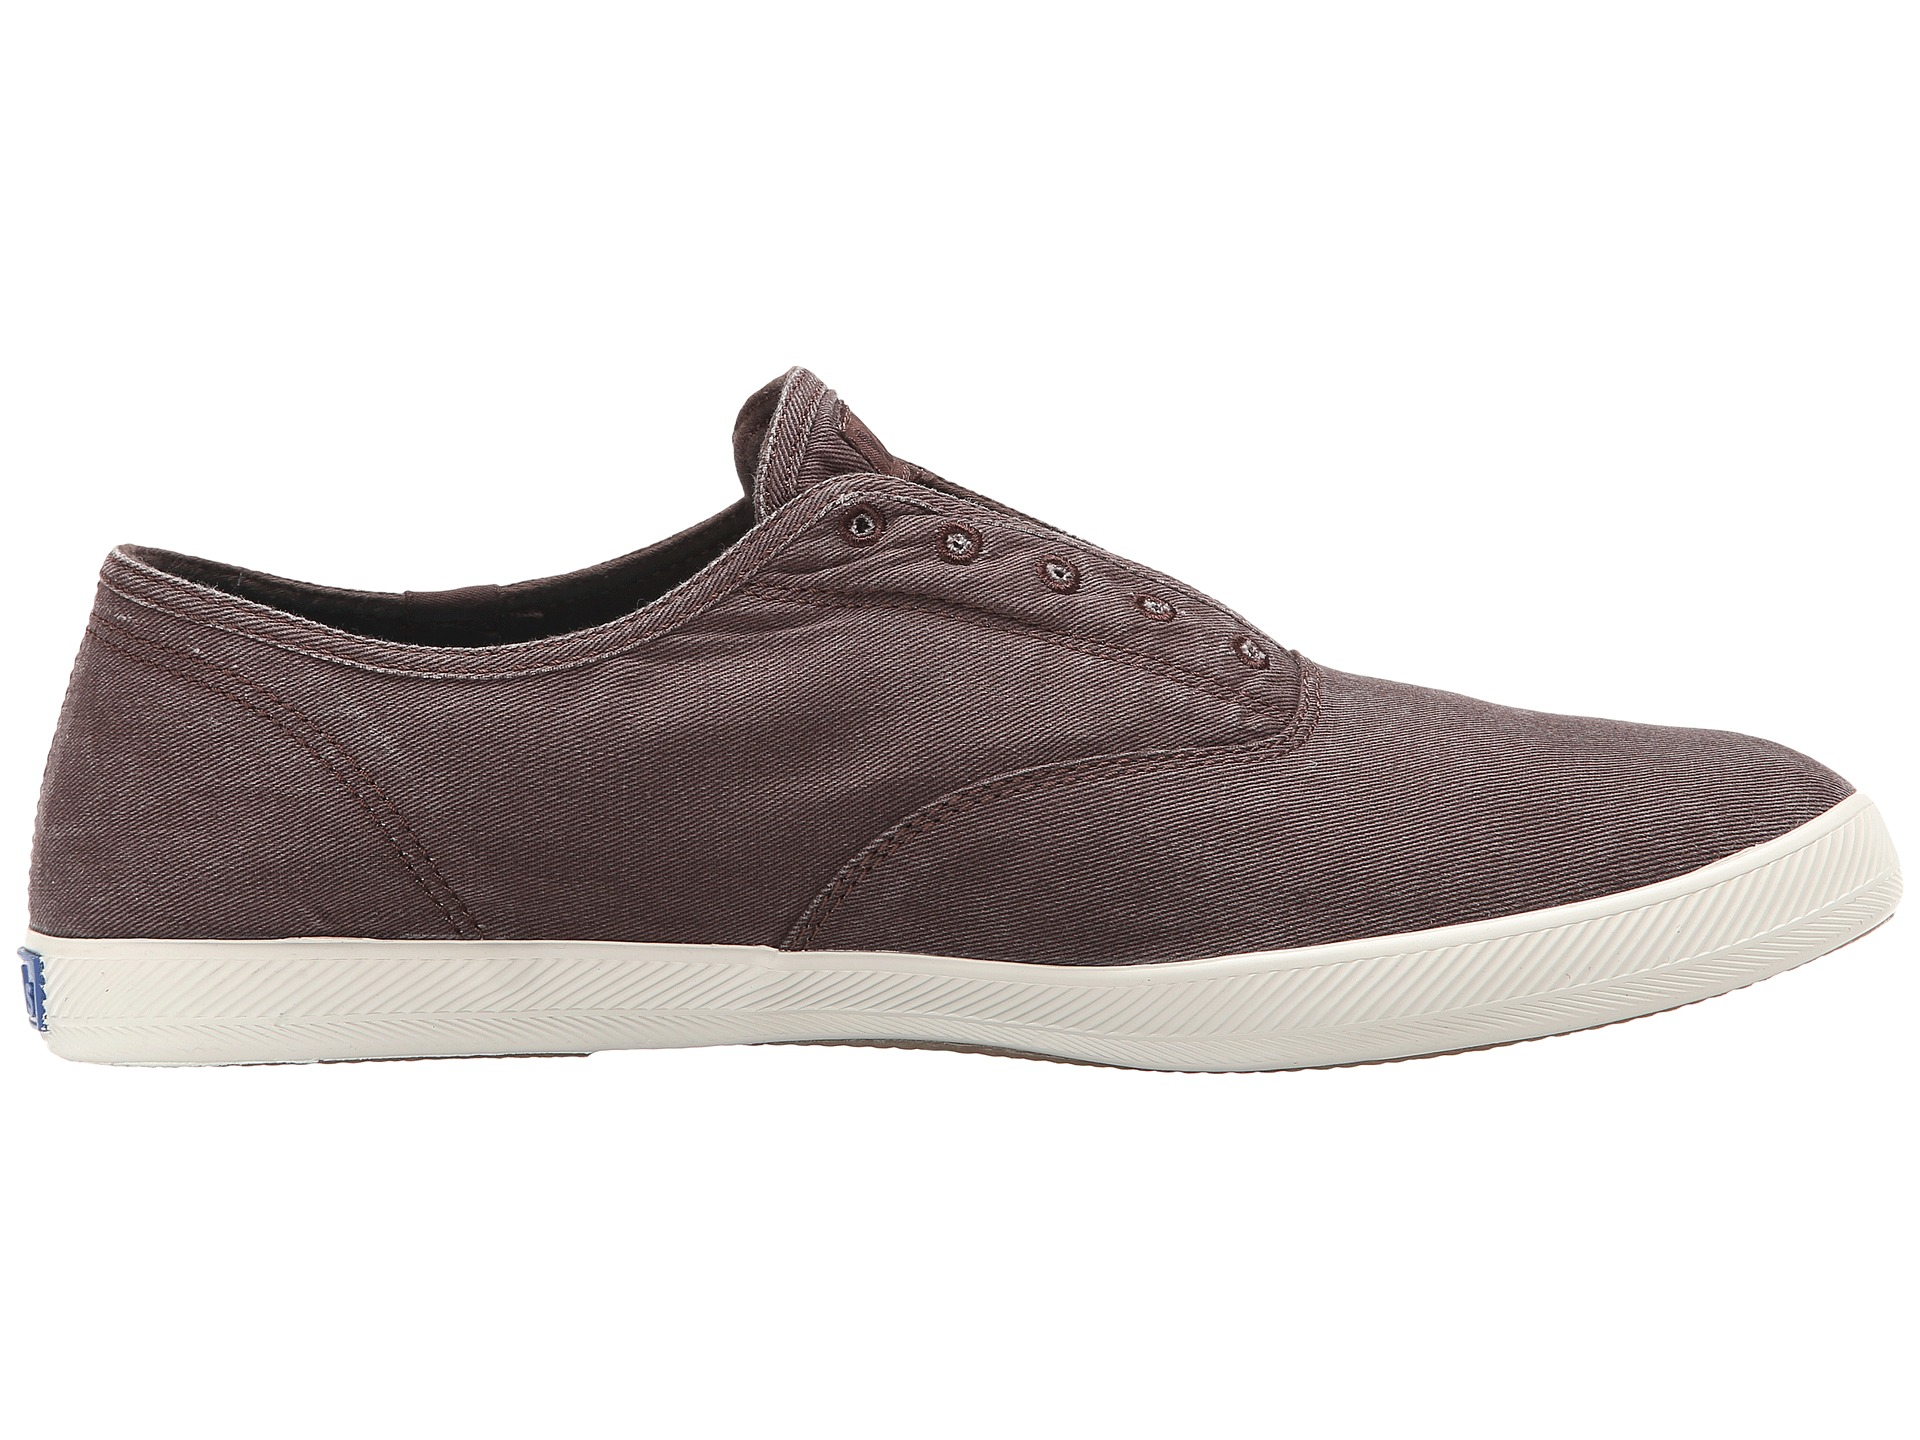 Lyst - Keds Chillax in Brown for Men